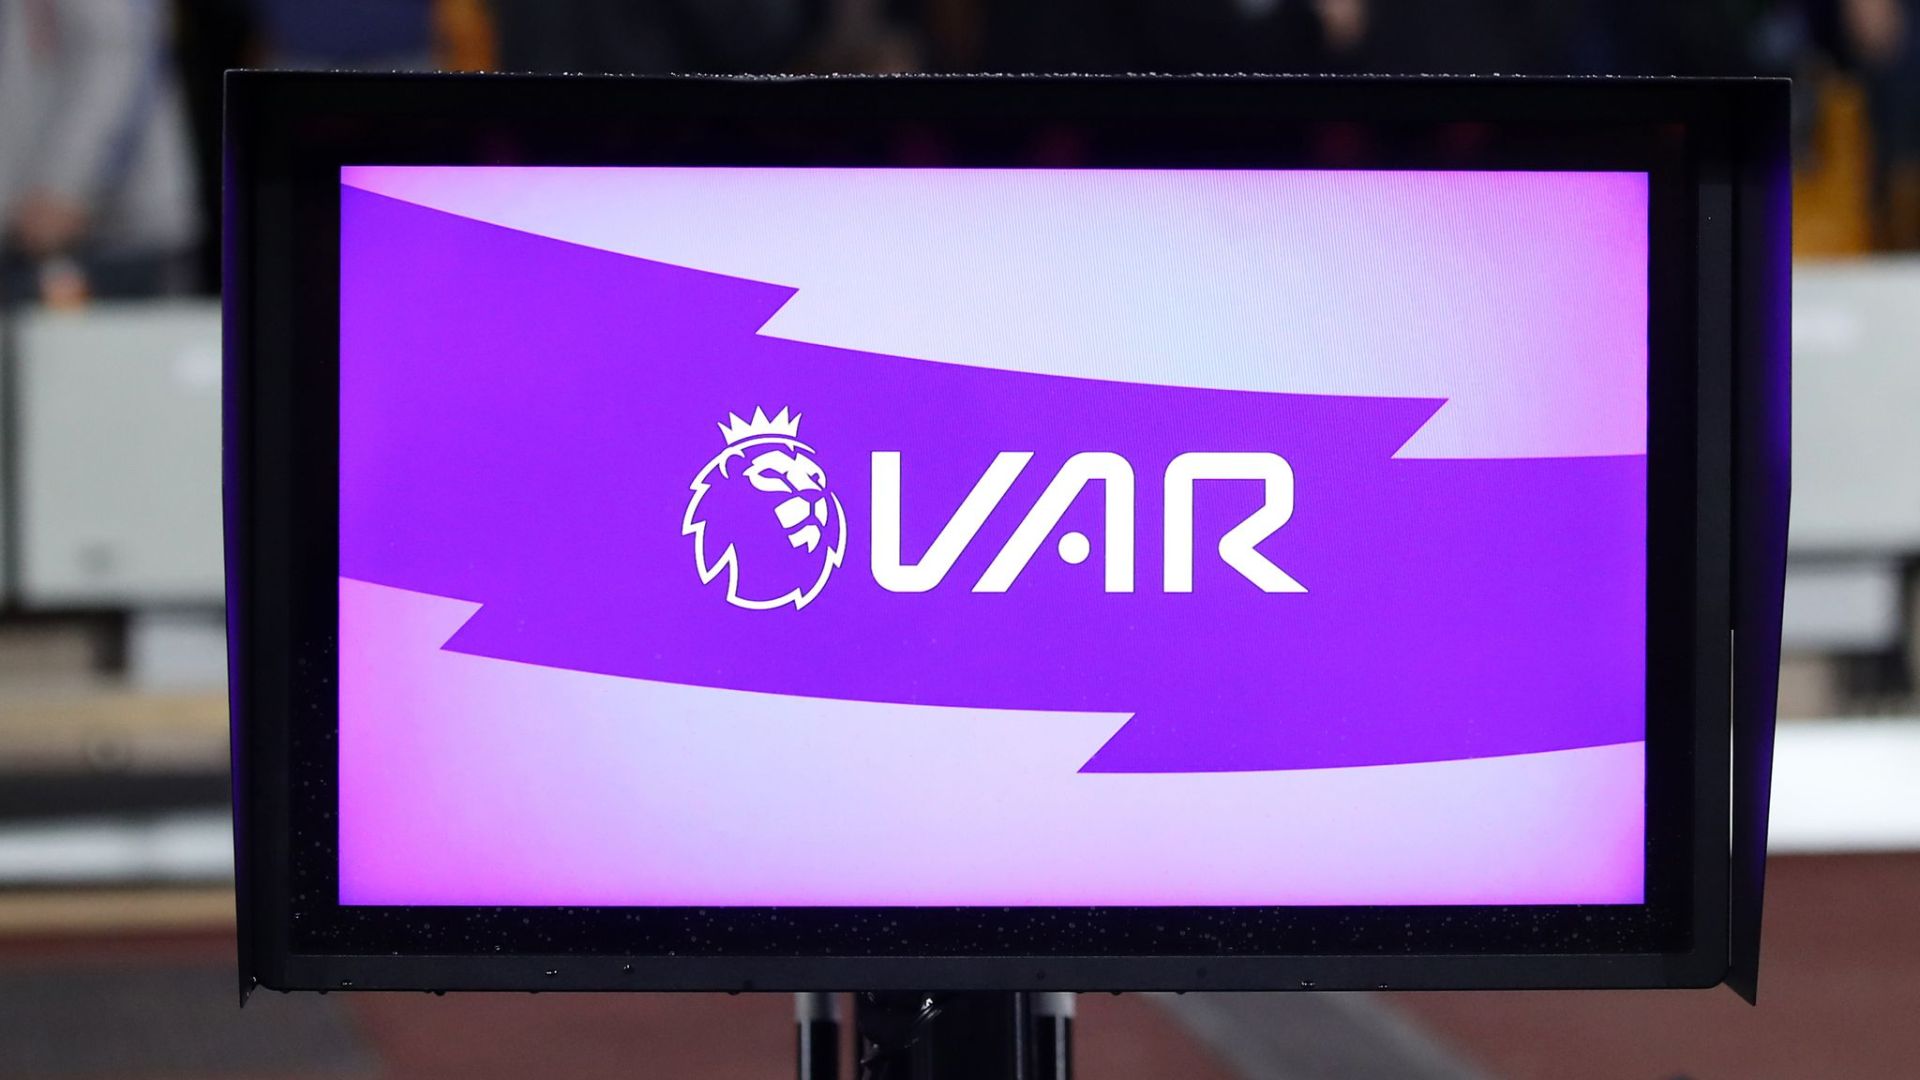 Howard Webb attains agreement on main VAR decision set to impact the three EPL clubs